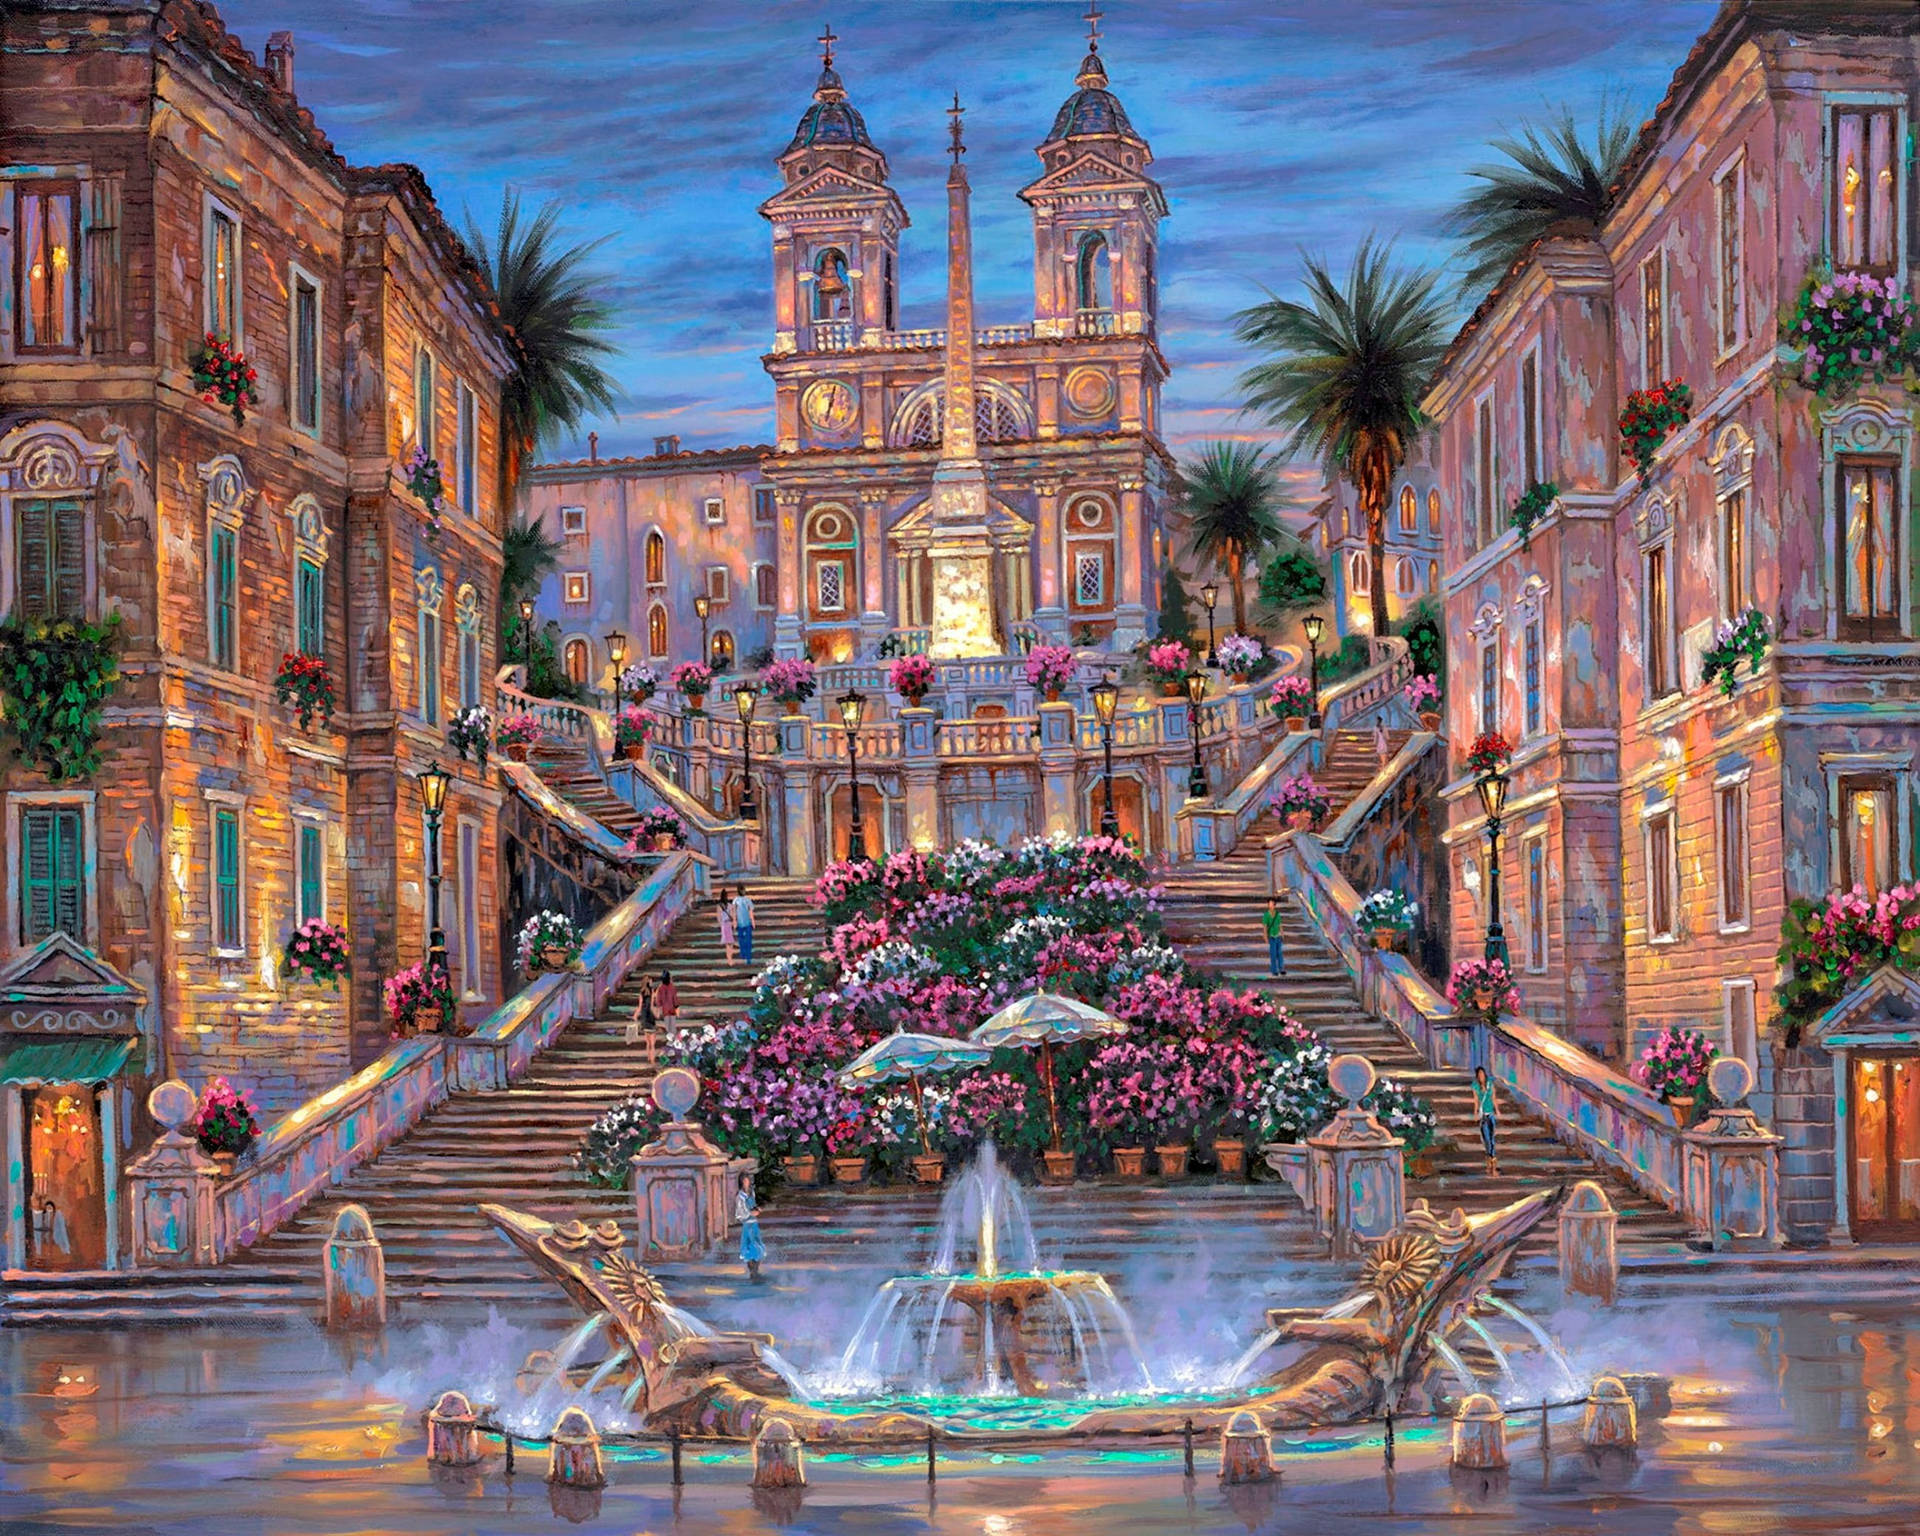 Caption: Breathtaking View of the Spanish Steps in Rome Wallpaper